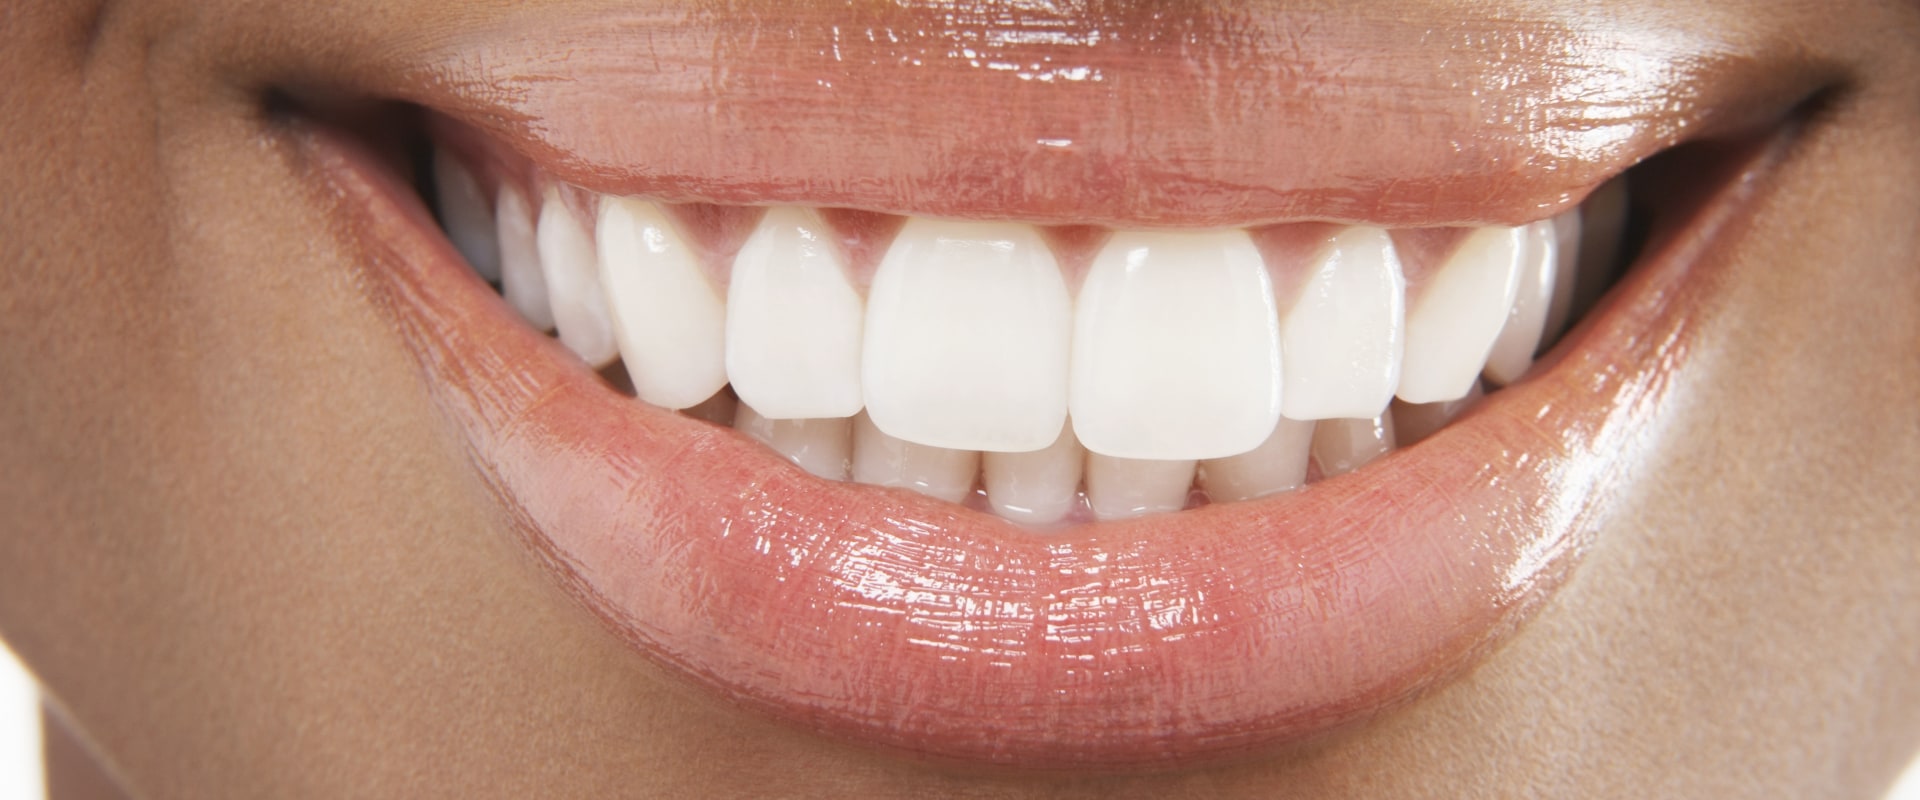 What are the best cosmetic teeth?